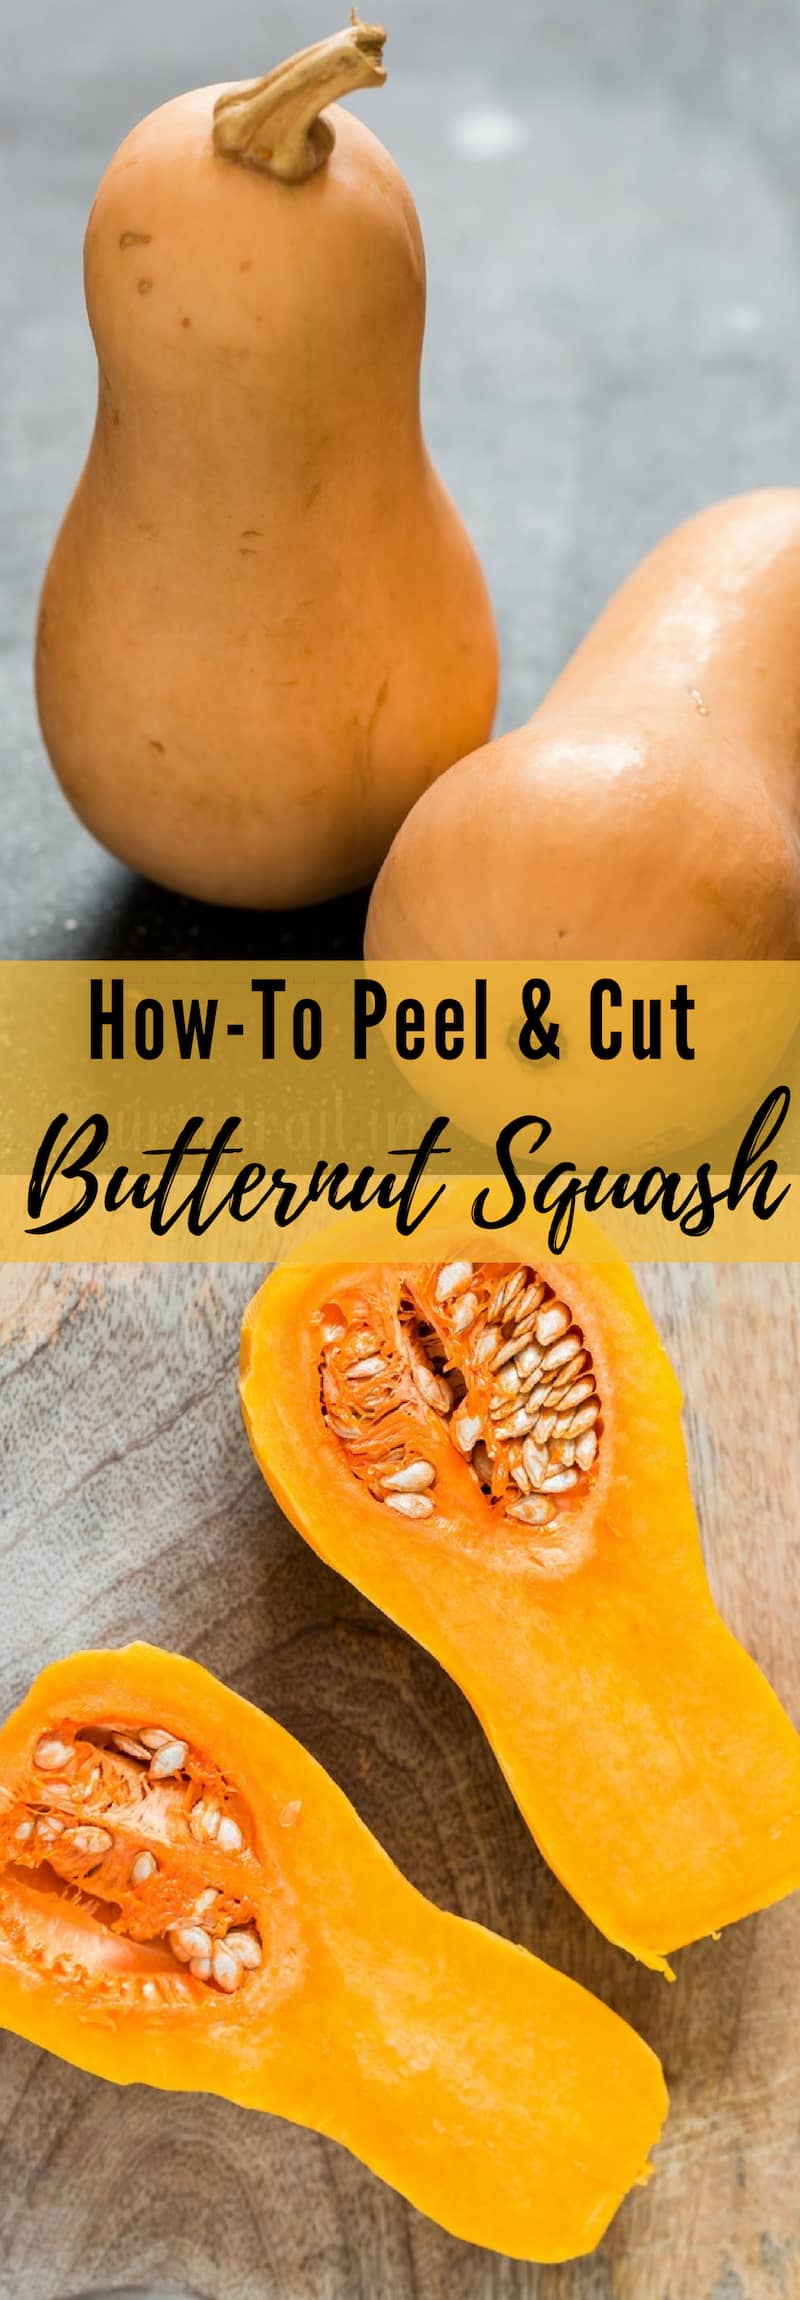 a complete guide on how to peel and cut butternut squash with text overlay